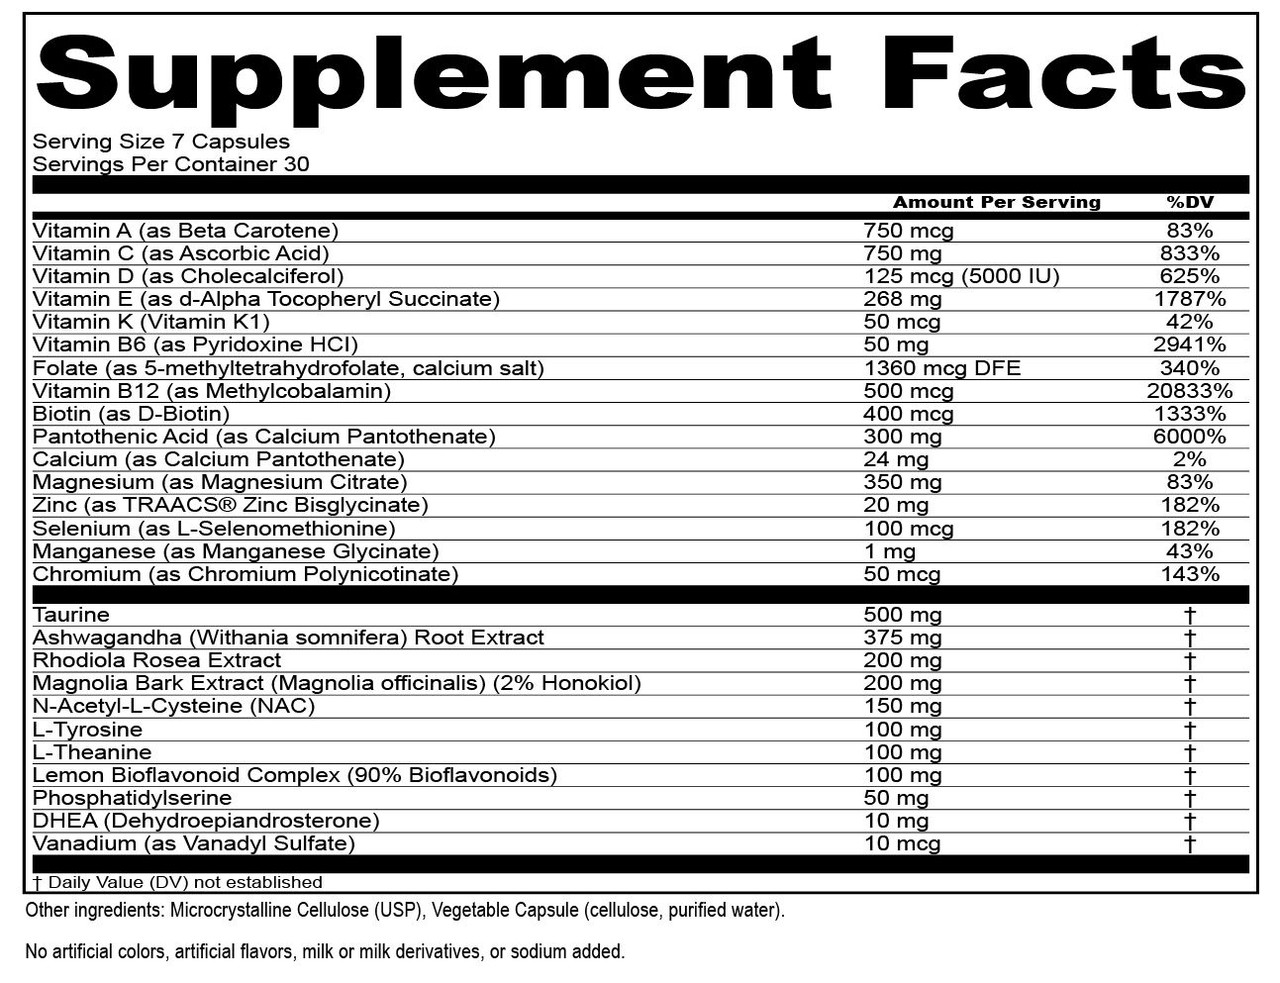 AdrenCalm + T supplement facts